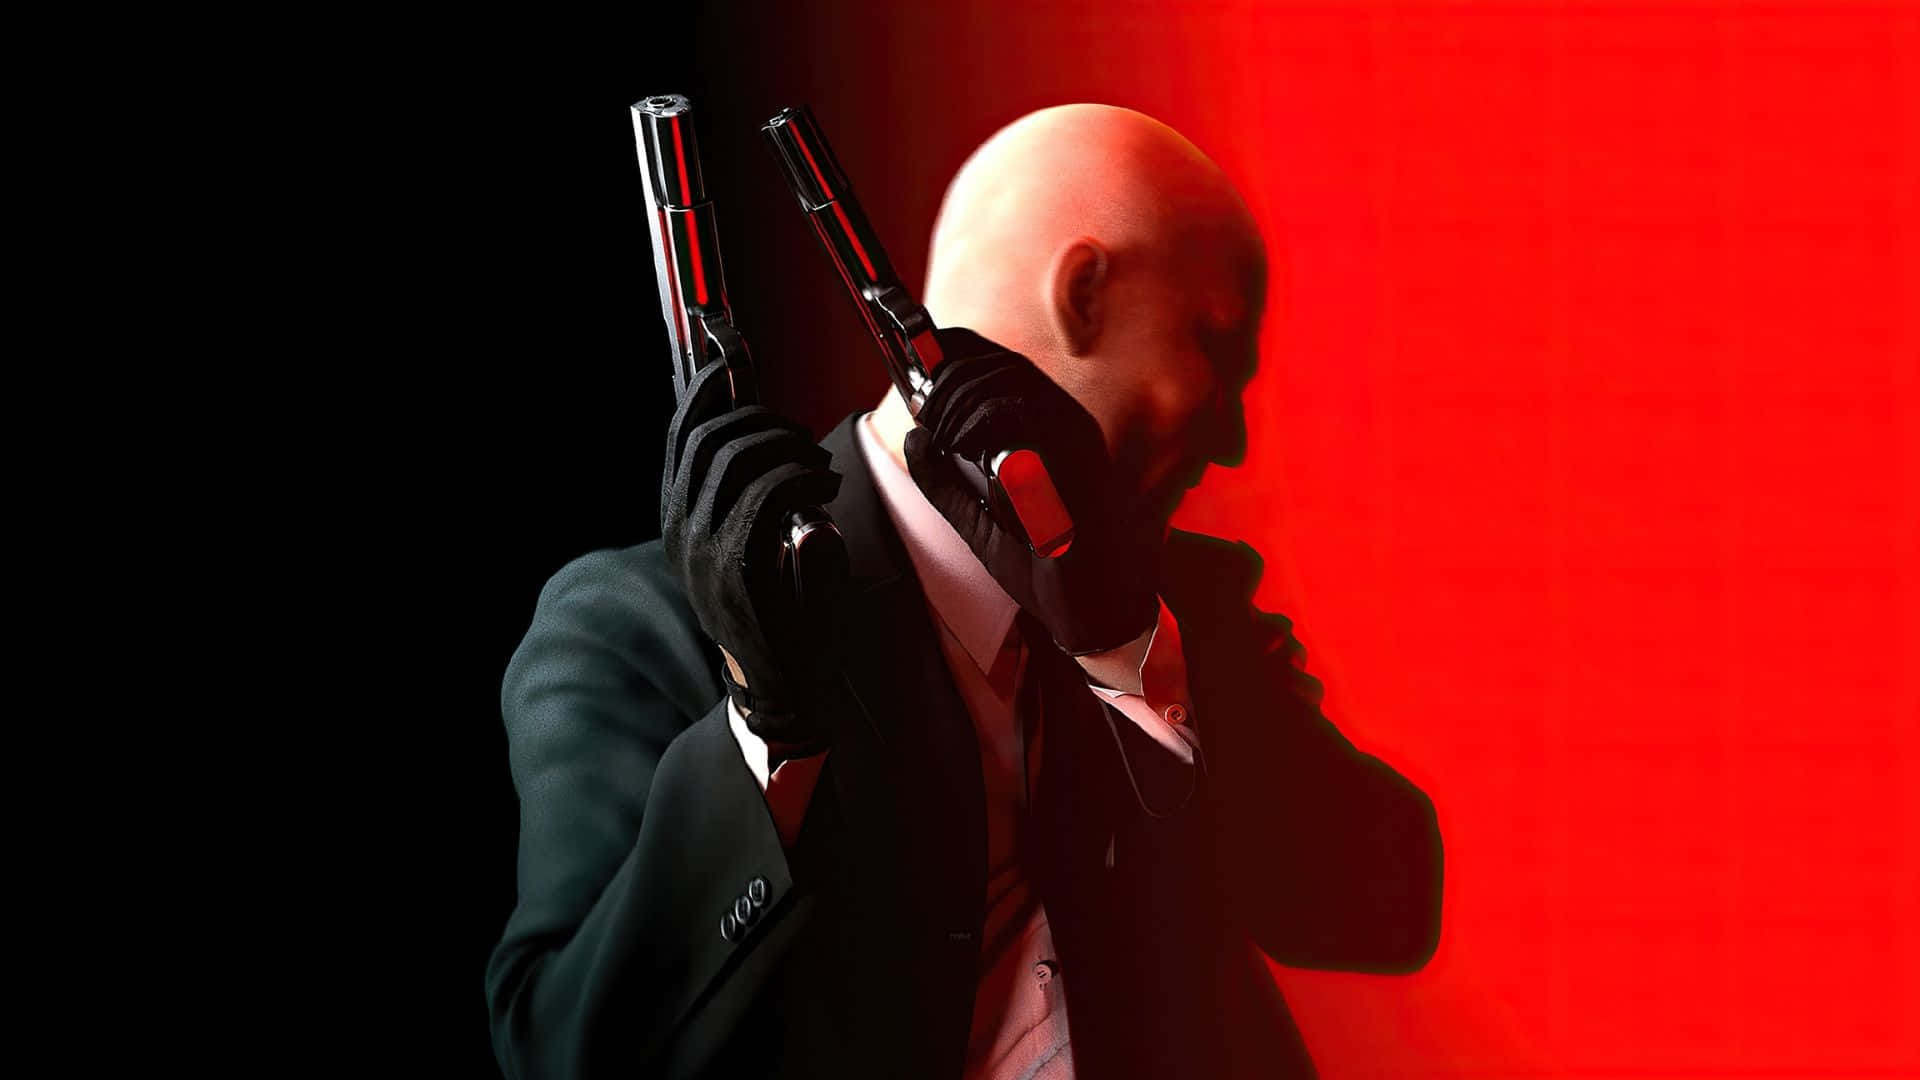 Hitmanabsolution Would Be Translated To 